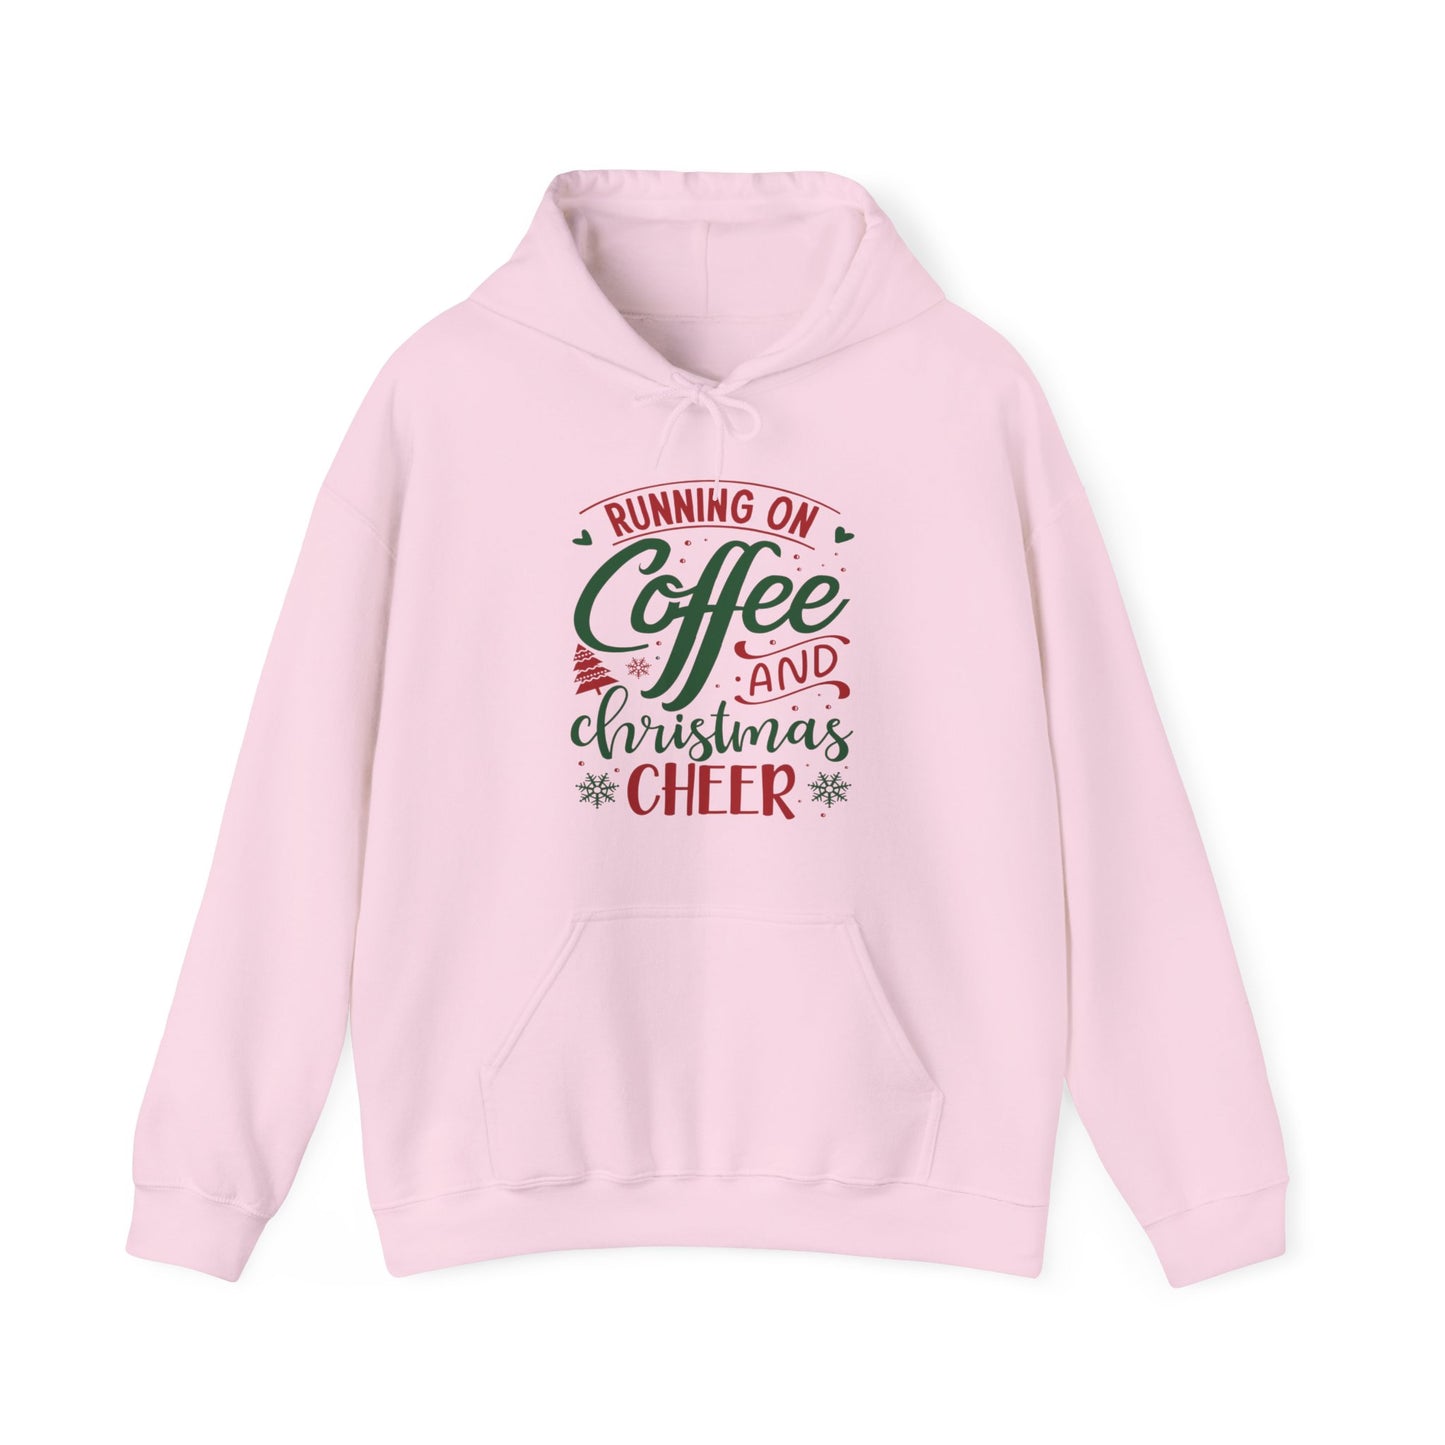 Christmas Cheer Hooded Sweatshirt For Holiday Coffee Lovers Hoodie For Fun Xmas Lounge Clothes